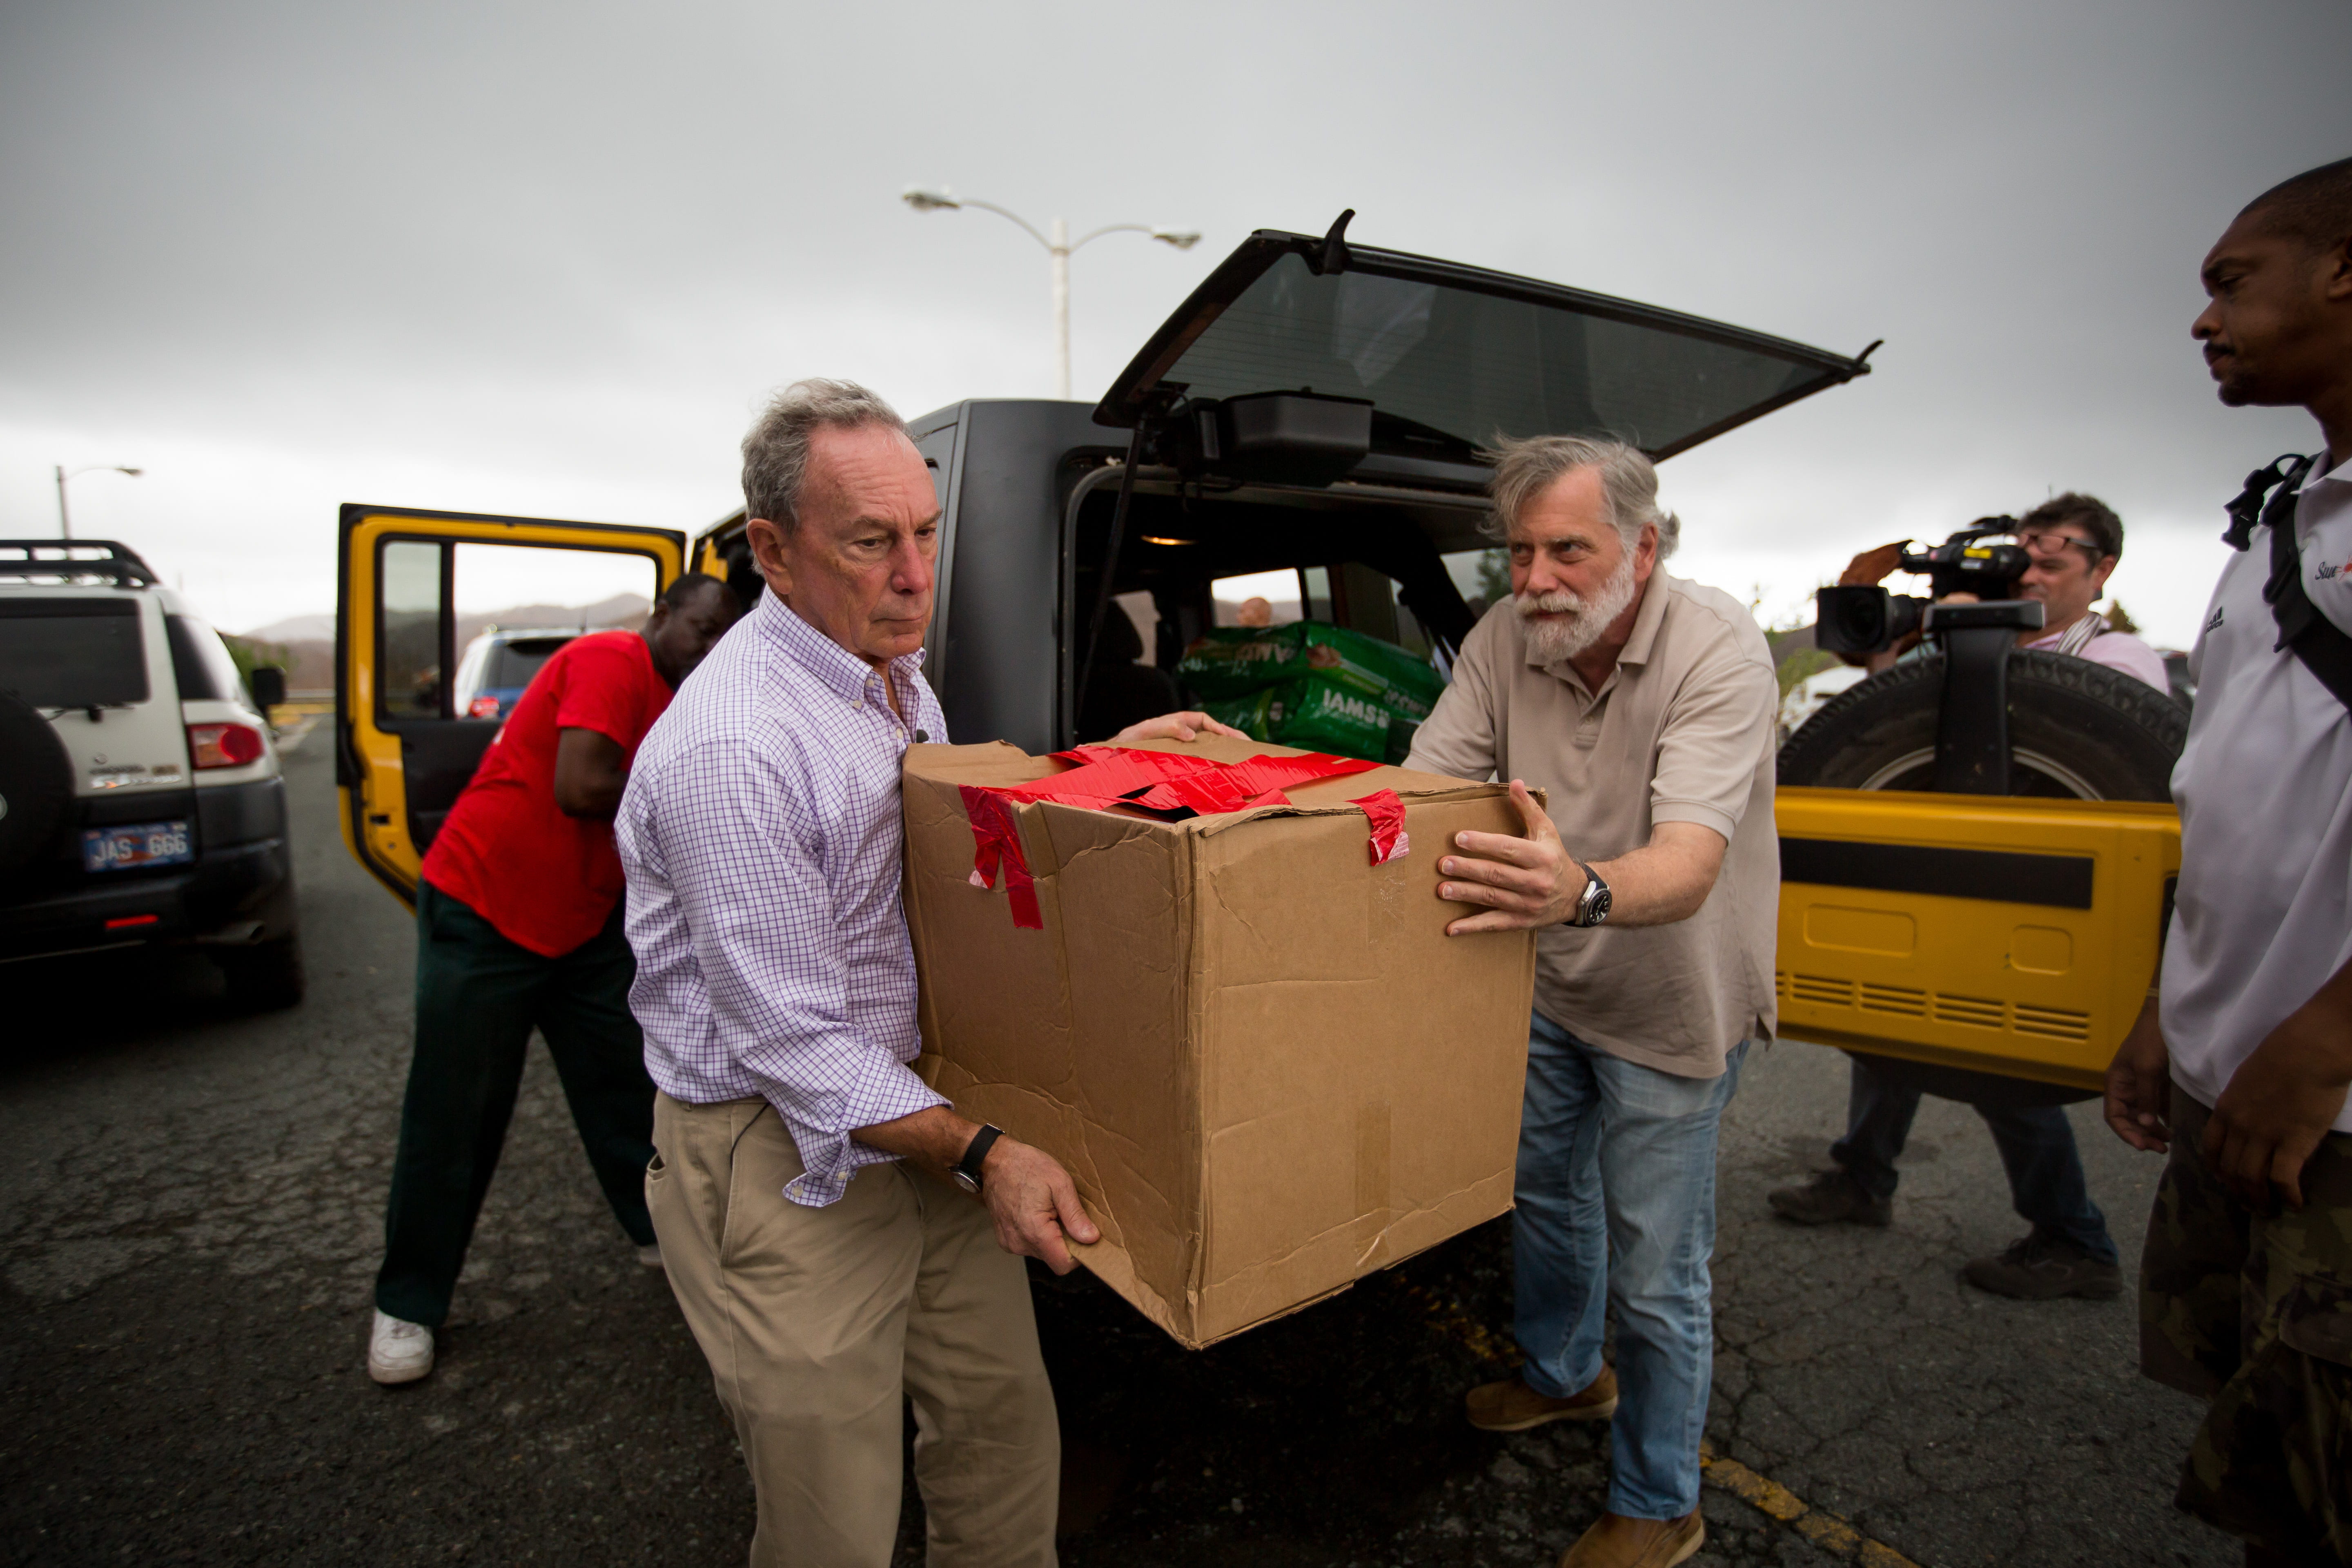 Mike Bloomberg carries boxes of supplies in the U.S. Virgin Islands following the hurricanes of 2017.